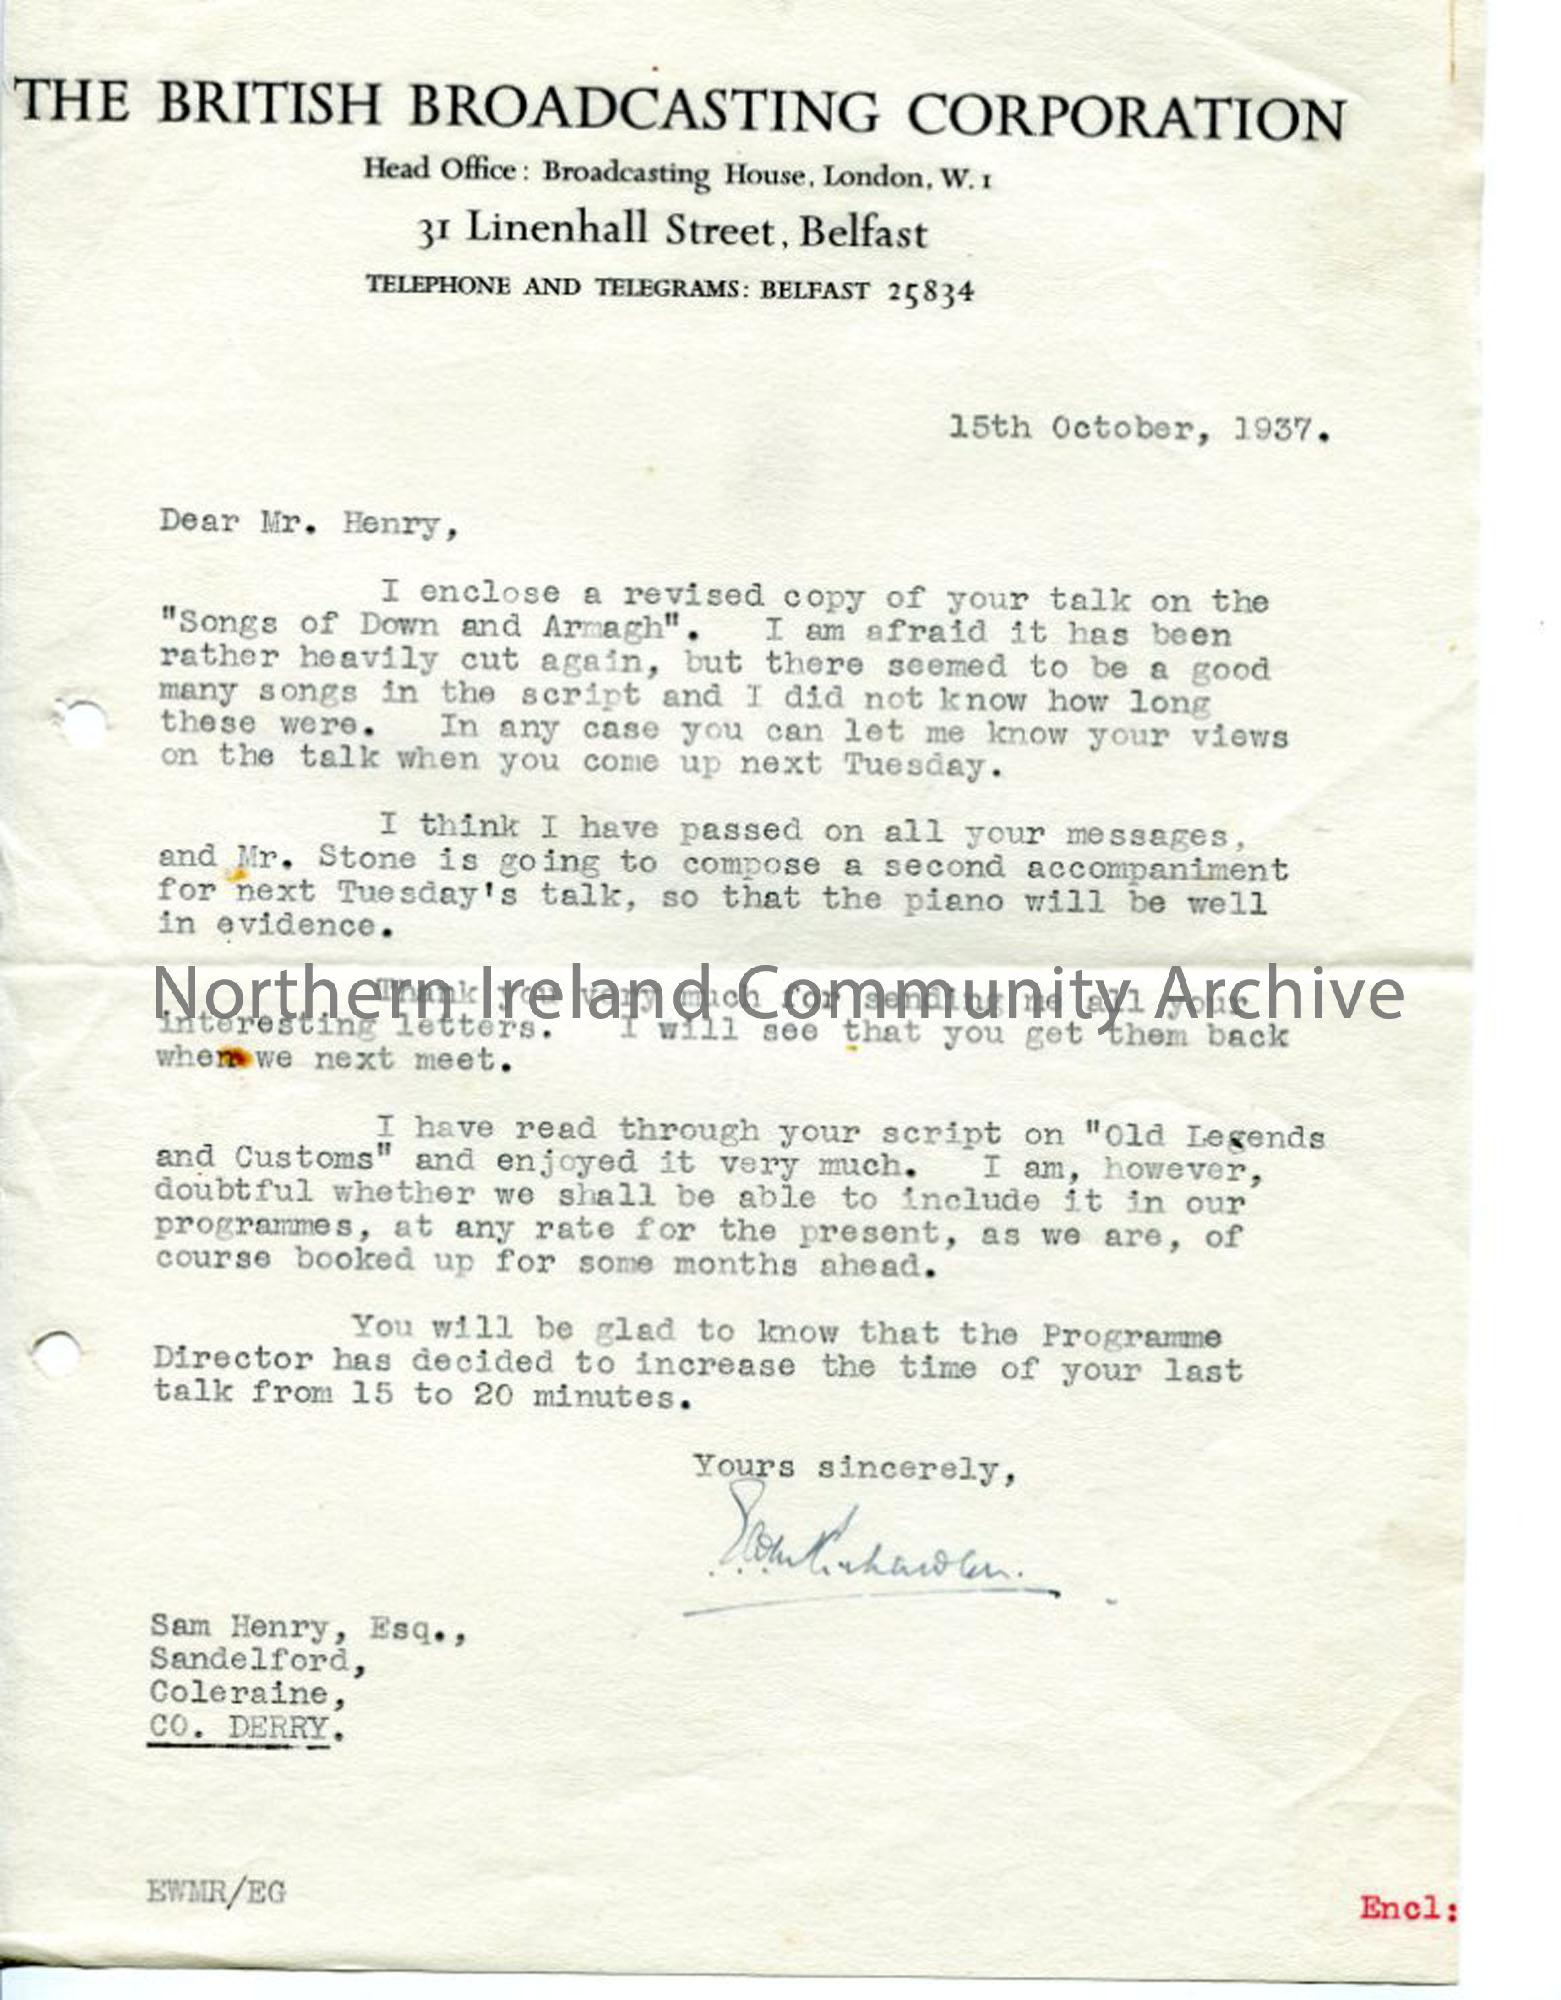 Letter from the BBC, dated 15.10.1937